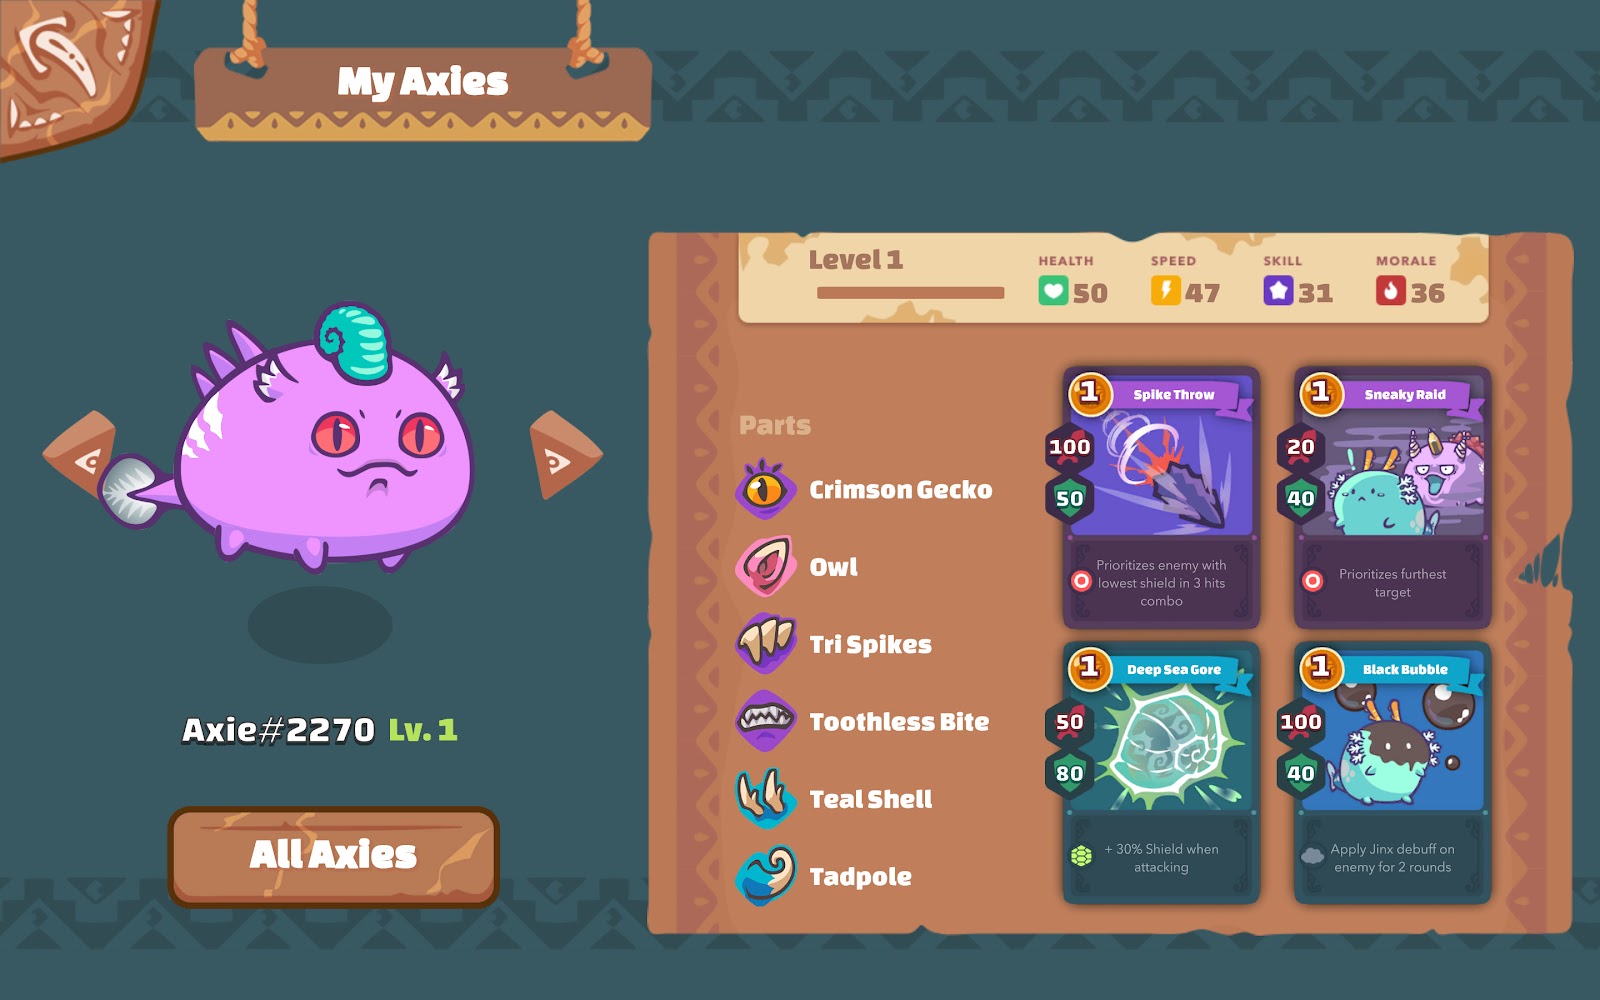 Axie Infinity Alpha Guide! - by Axie Infinity